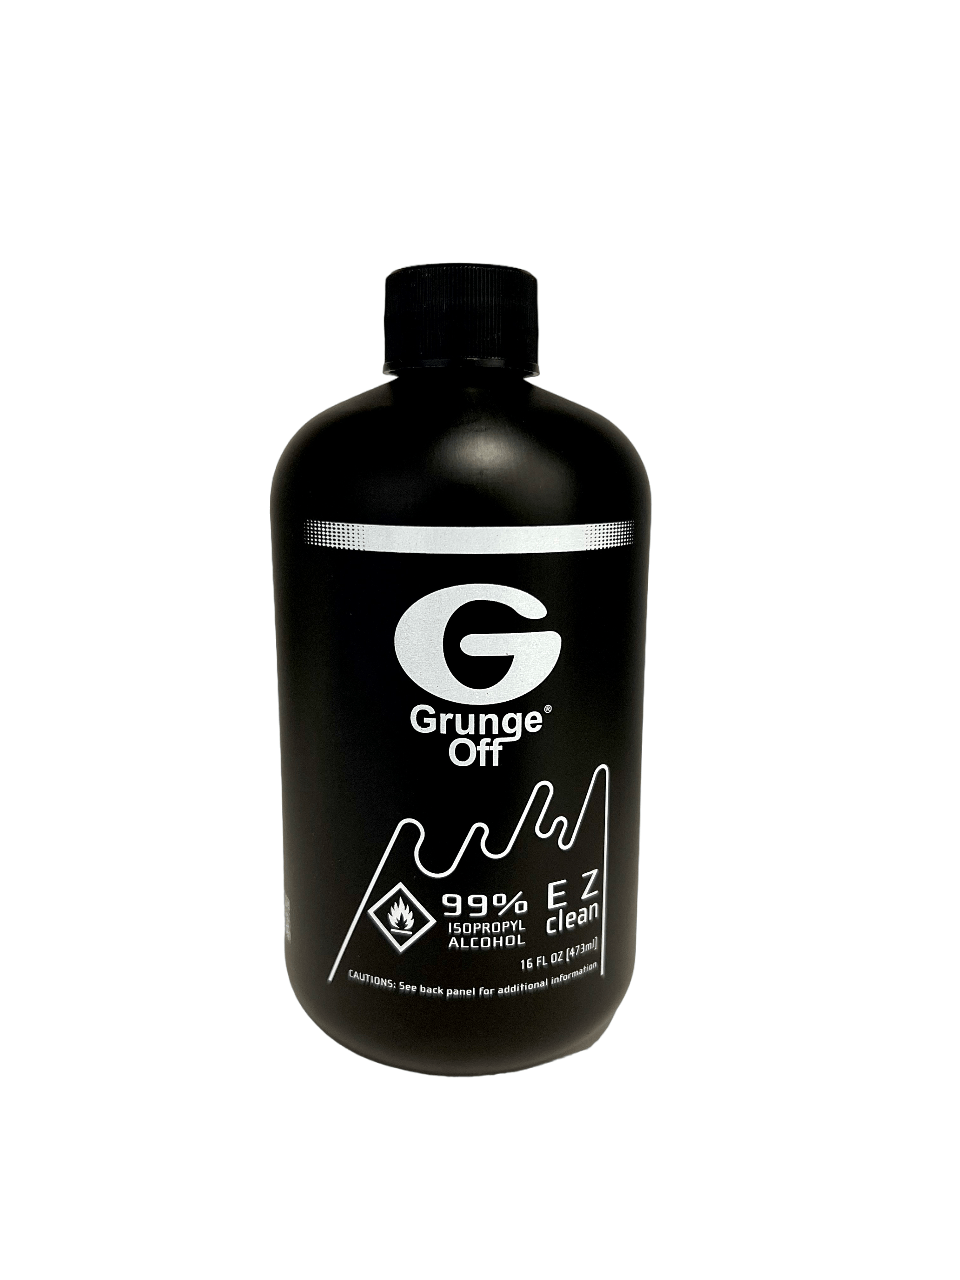 Grunge Off 99% Isopropyl Alcohol, 16oz | Third Party Brands | 420 Science